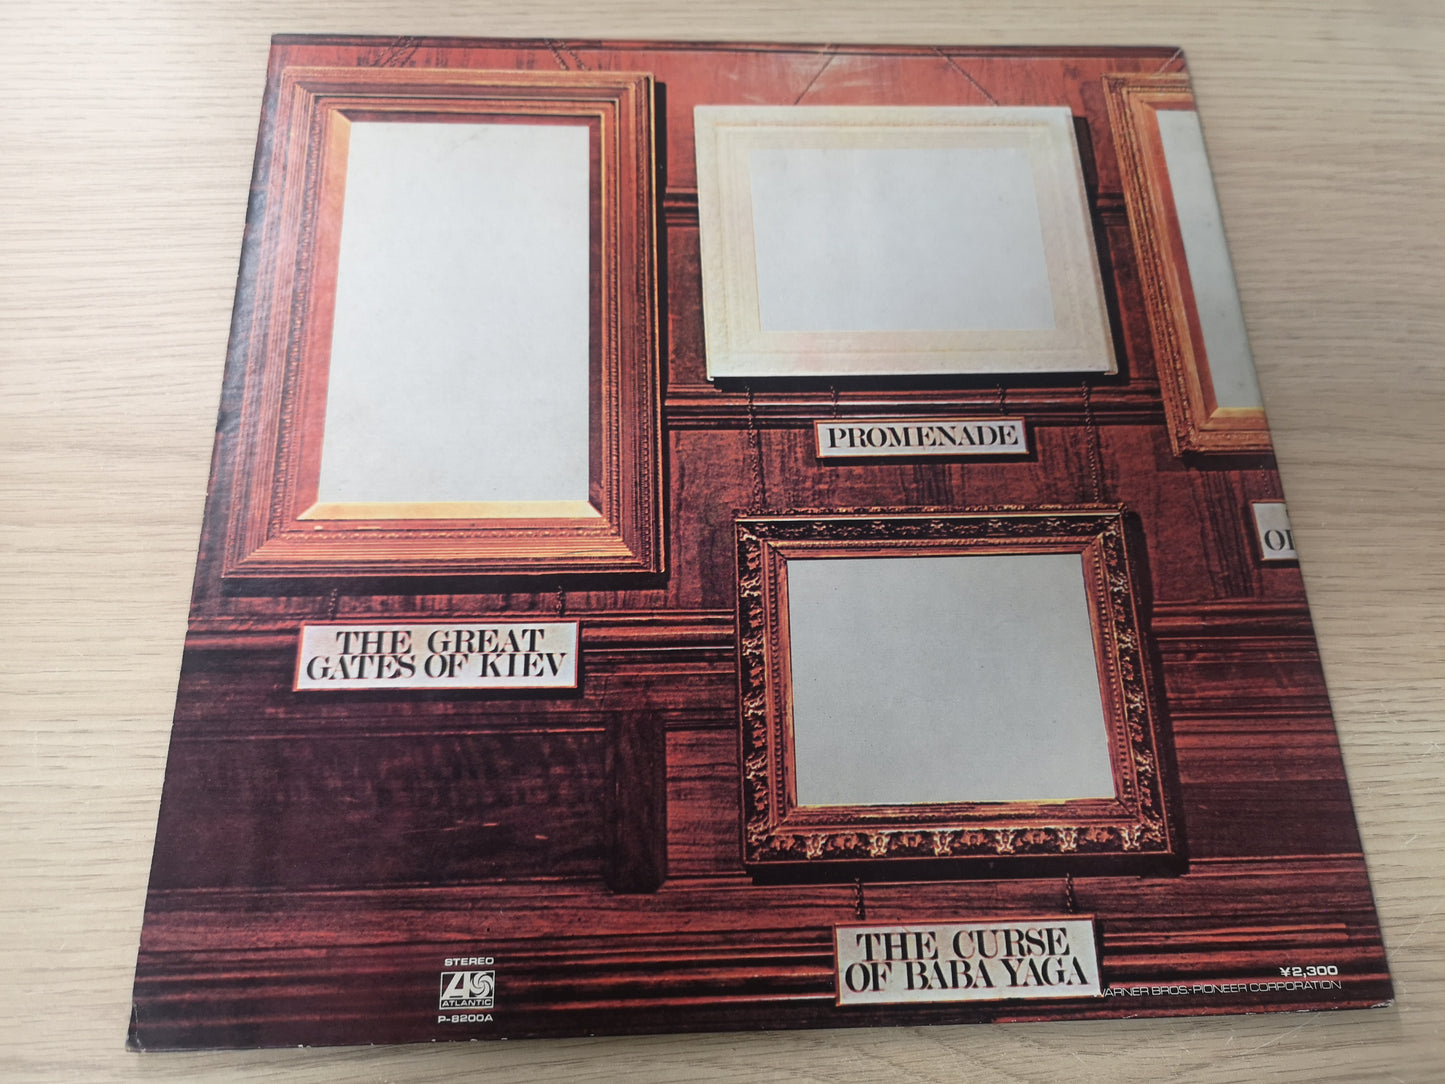 Emerson Lake & Palmer "Pictures At An Exhibition" Orig Japan 1972 EX/VG++